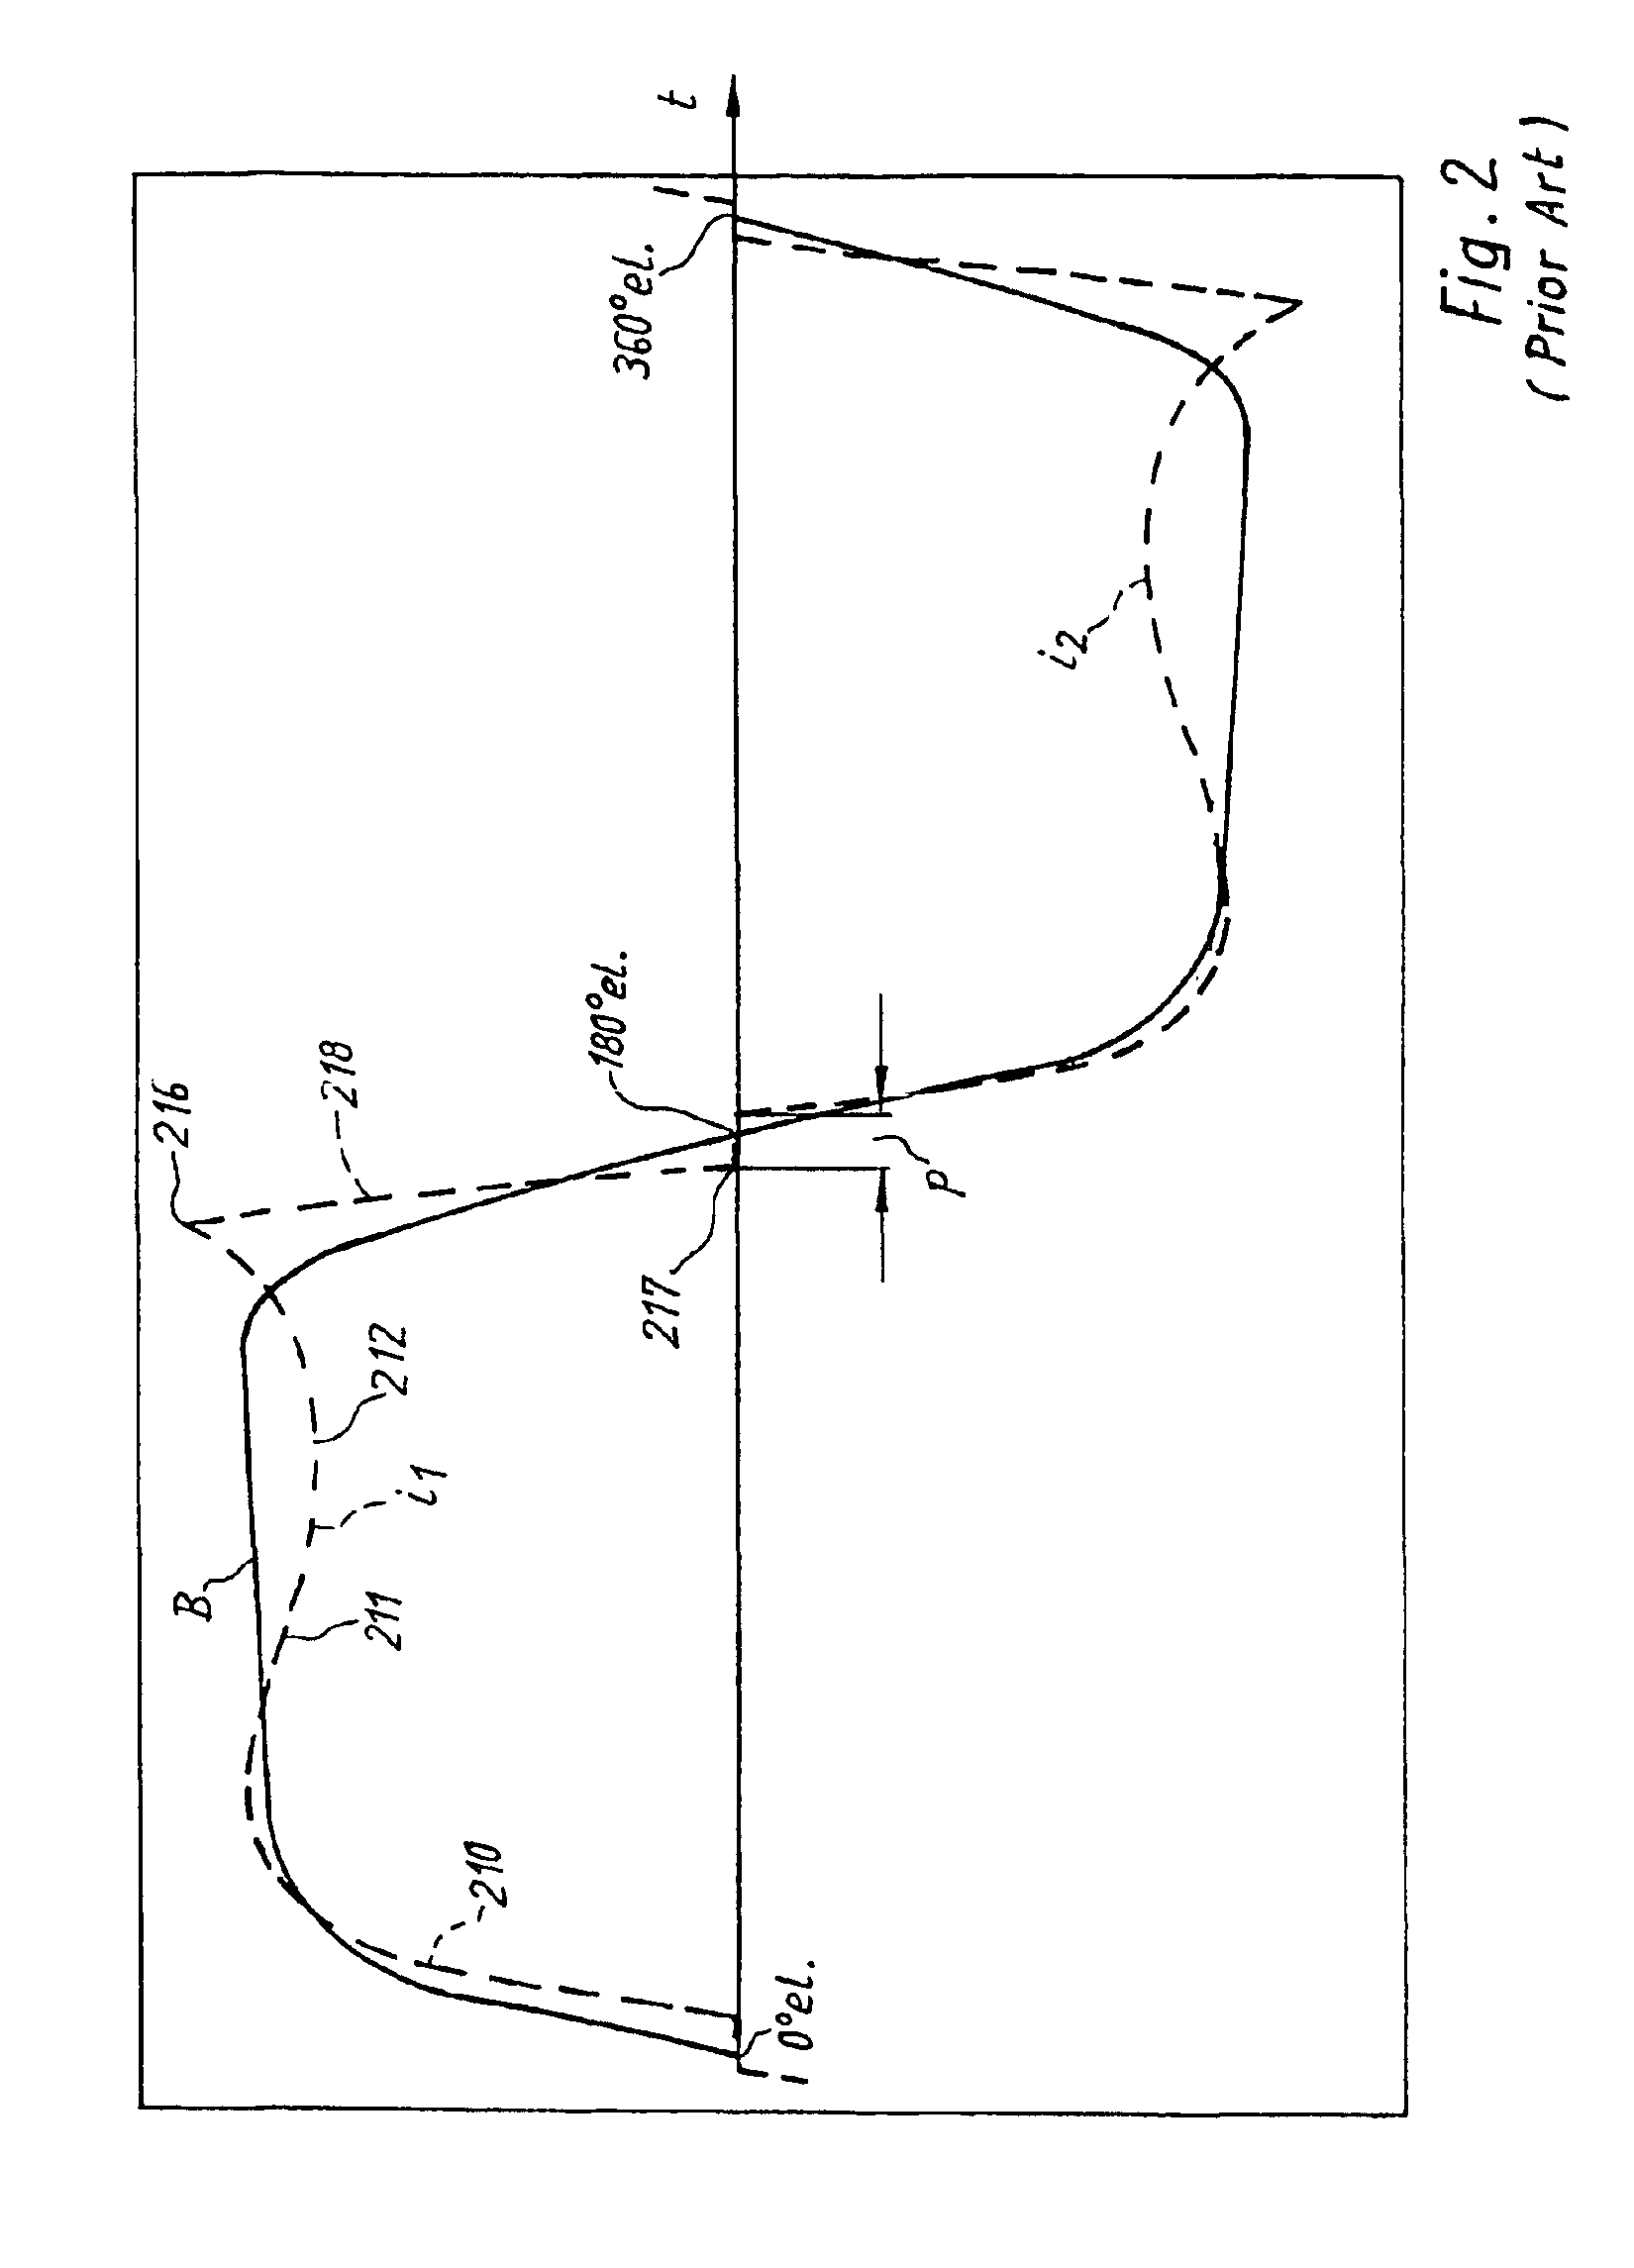 Method for limiting the current in an electric motor, and a motor for carrying out one such method